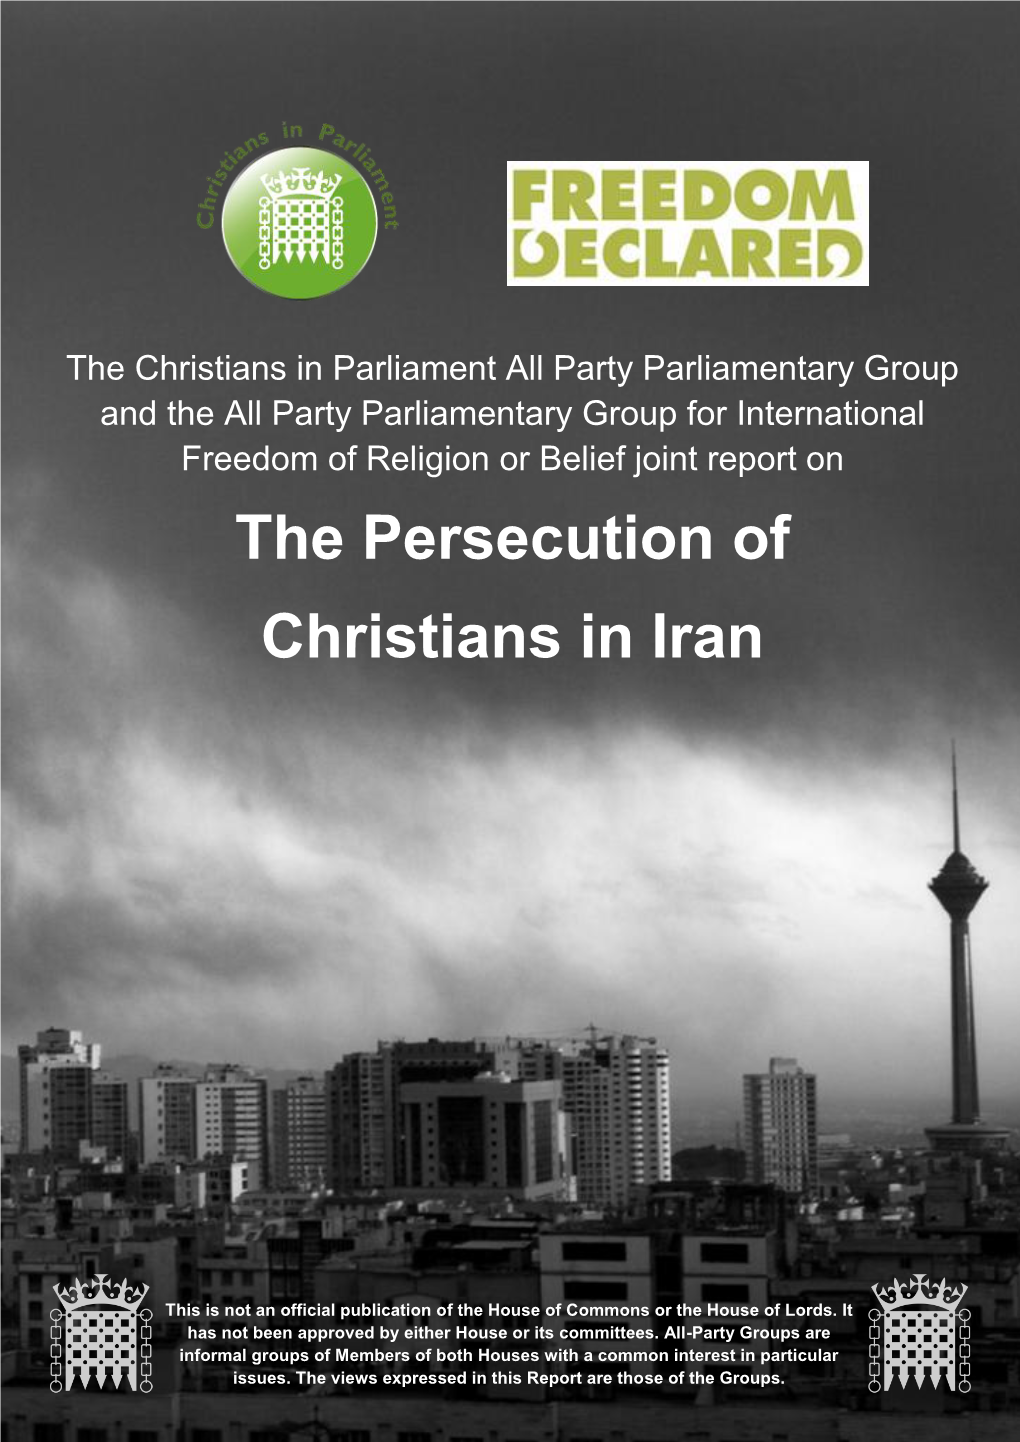 The Persecution of Christians in Iran